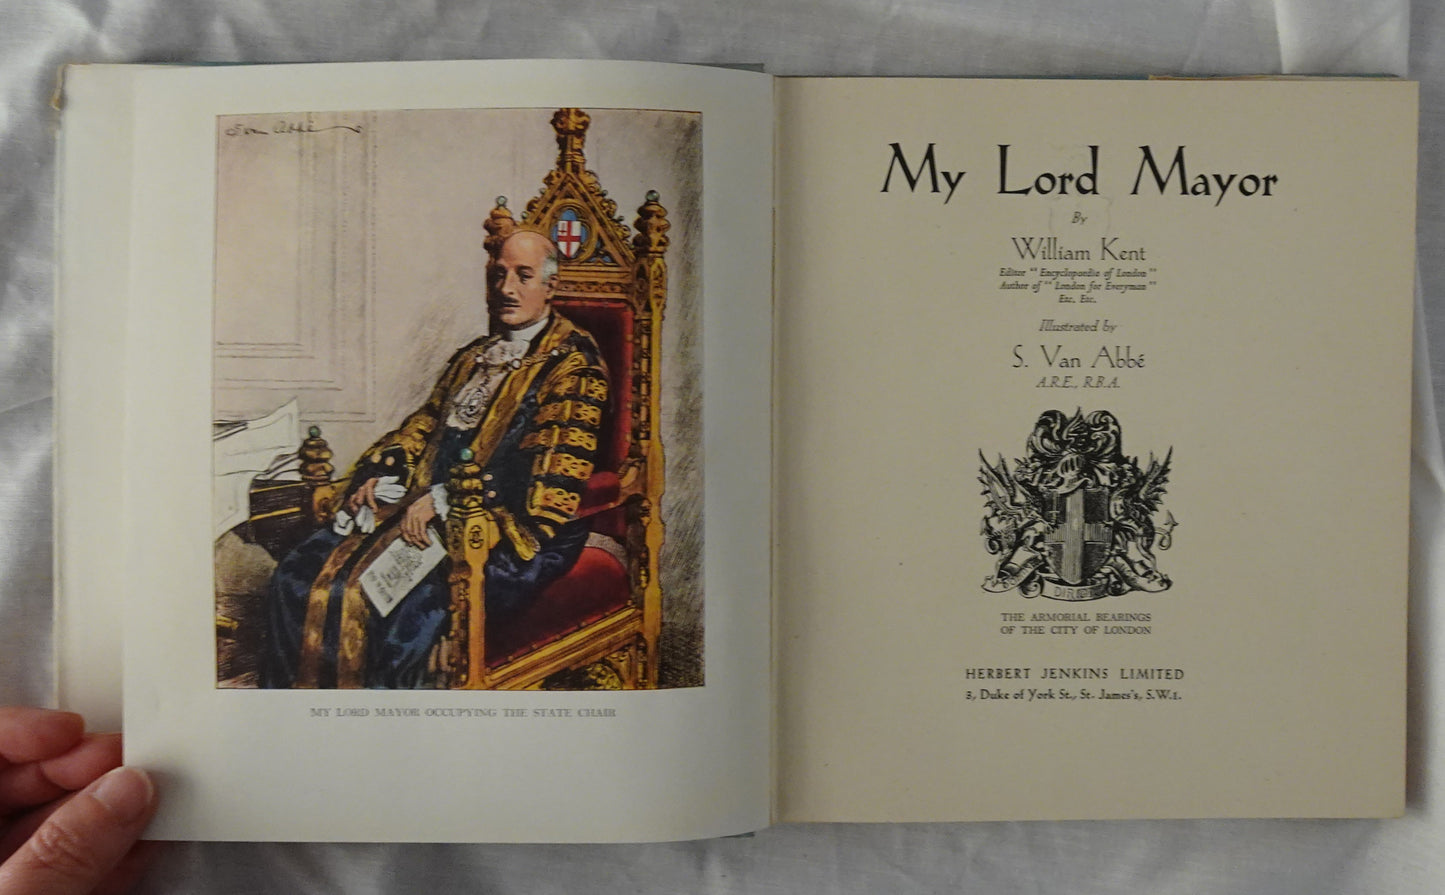 My Lord Mayor by William Kent